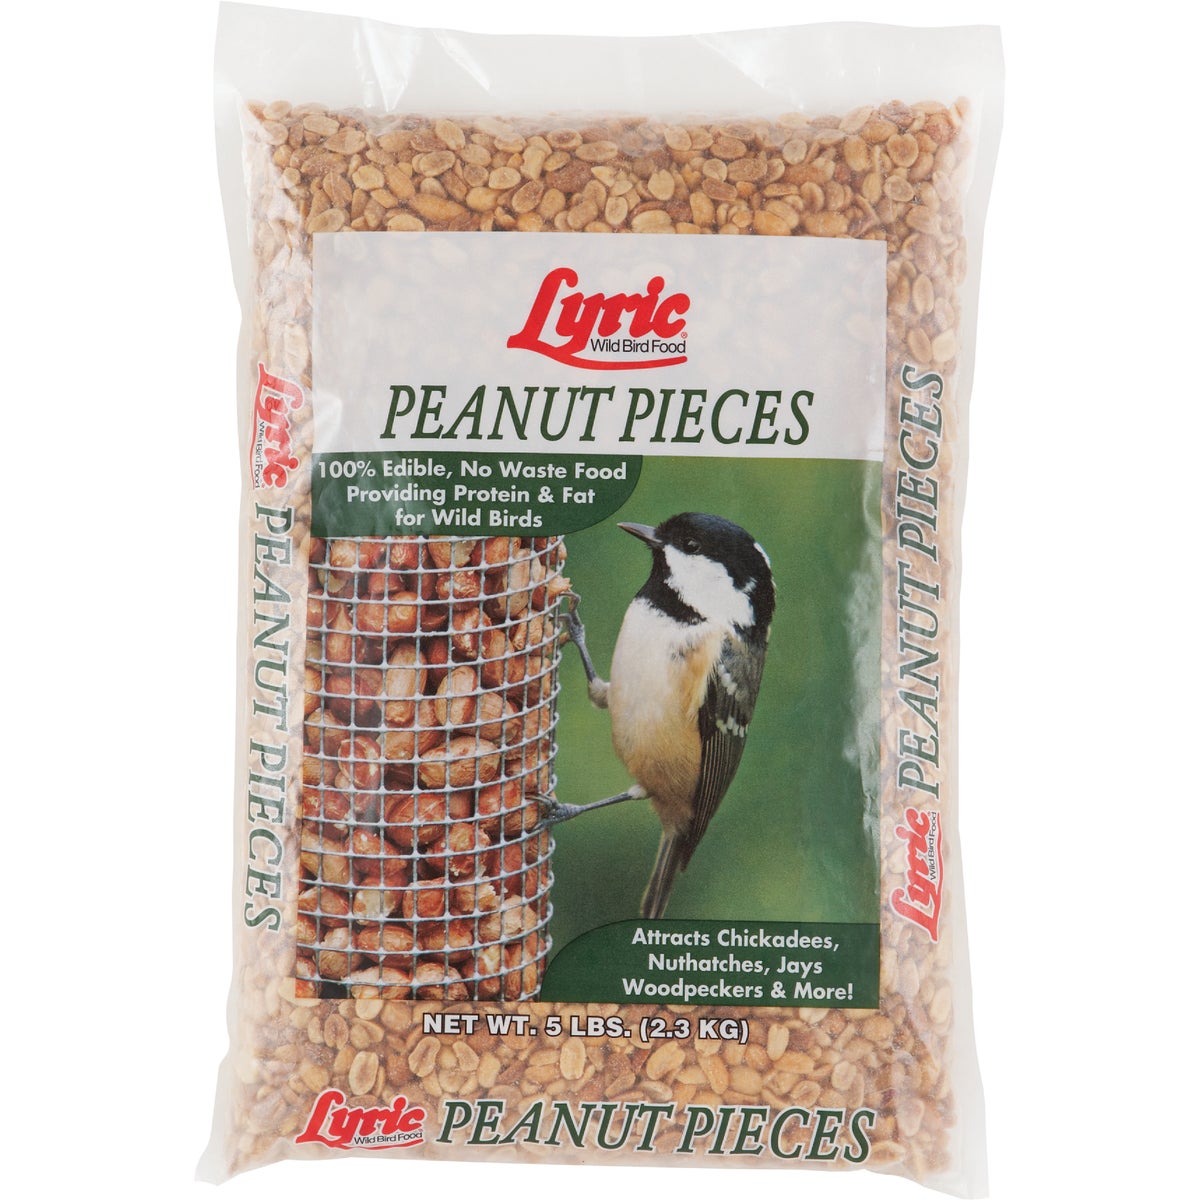 Item 701862, Peanut pieces are a perfect treat for feathered friends visiting your 